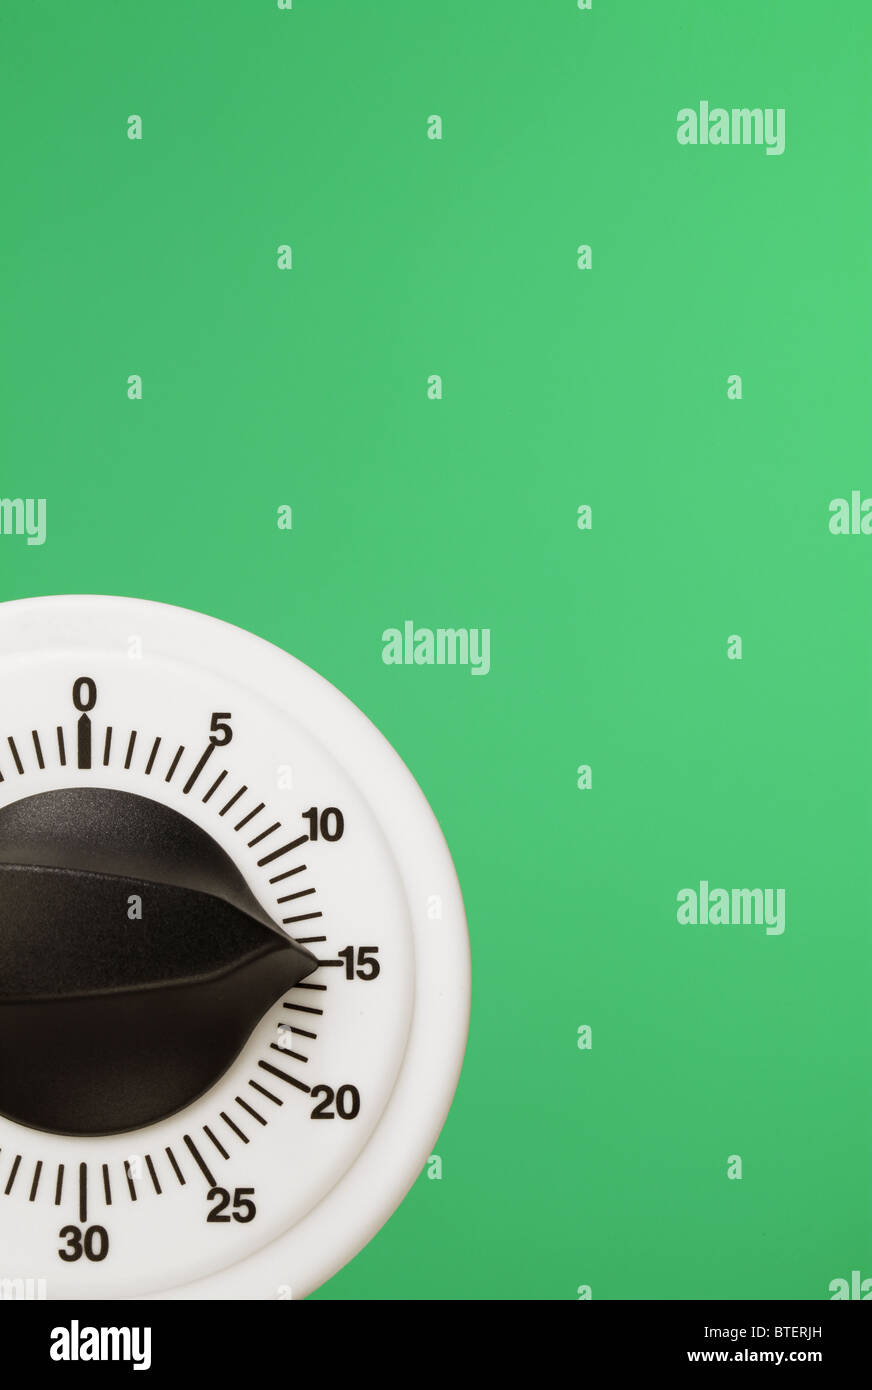 A count down timing device floating on a green background Stock Photo